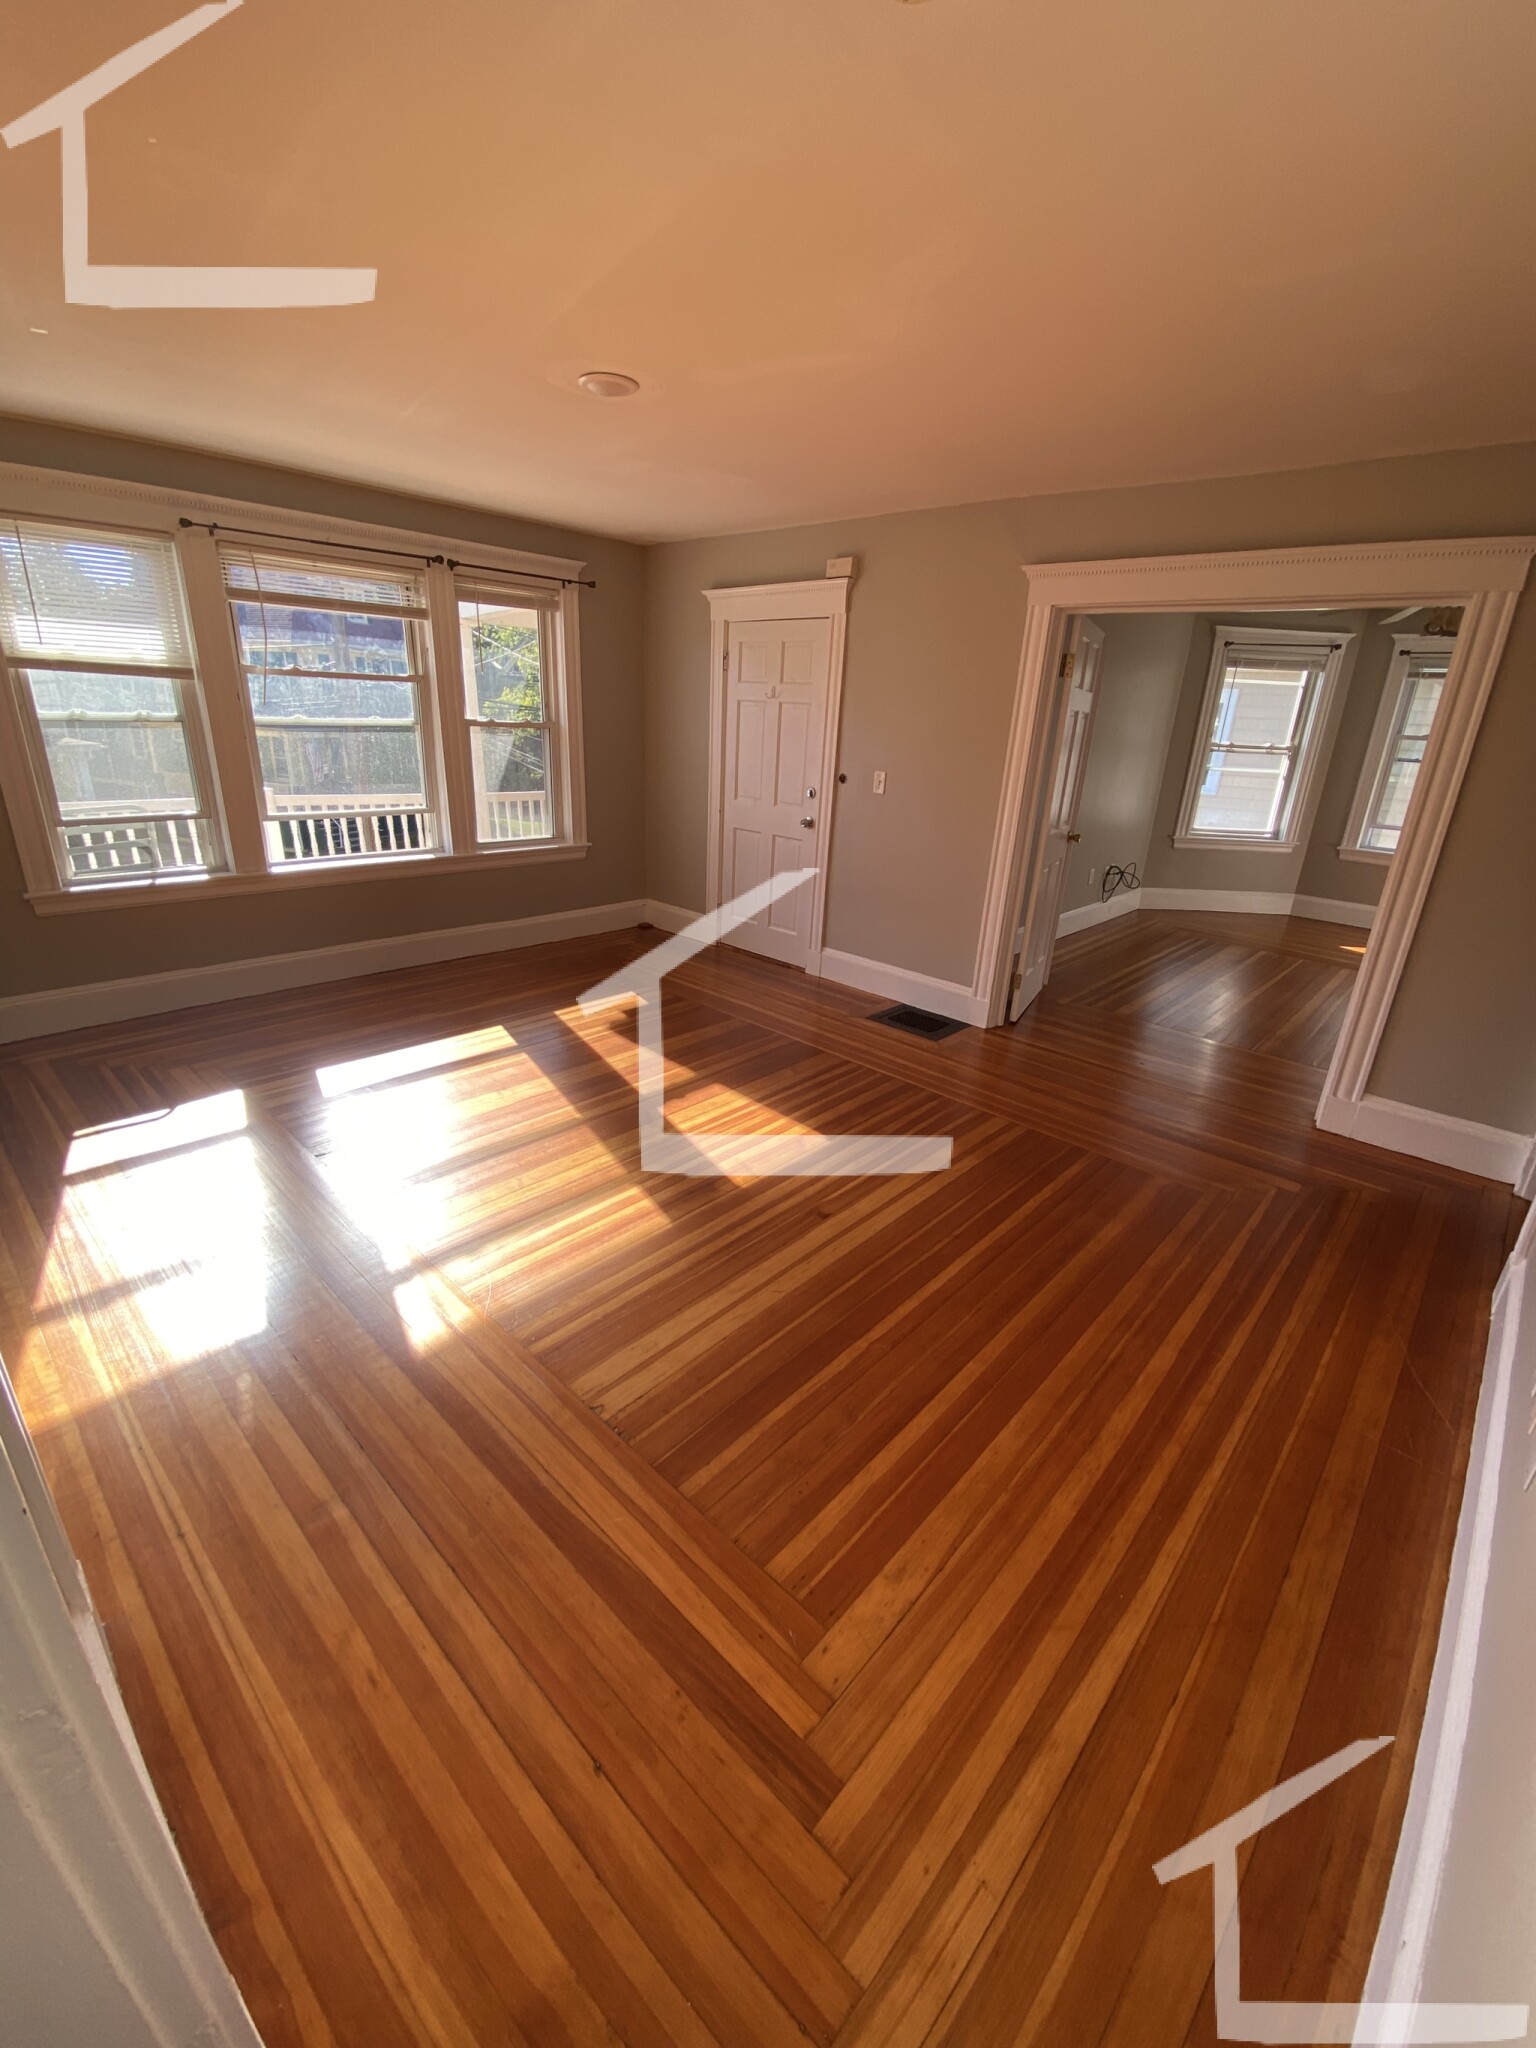 Photos of apartment on Ruggles St.,Quincy MA 02169